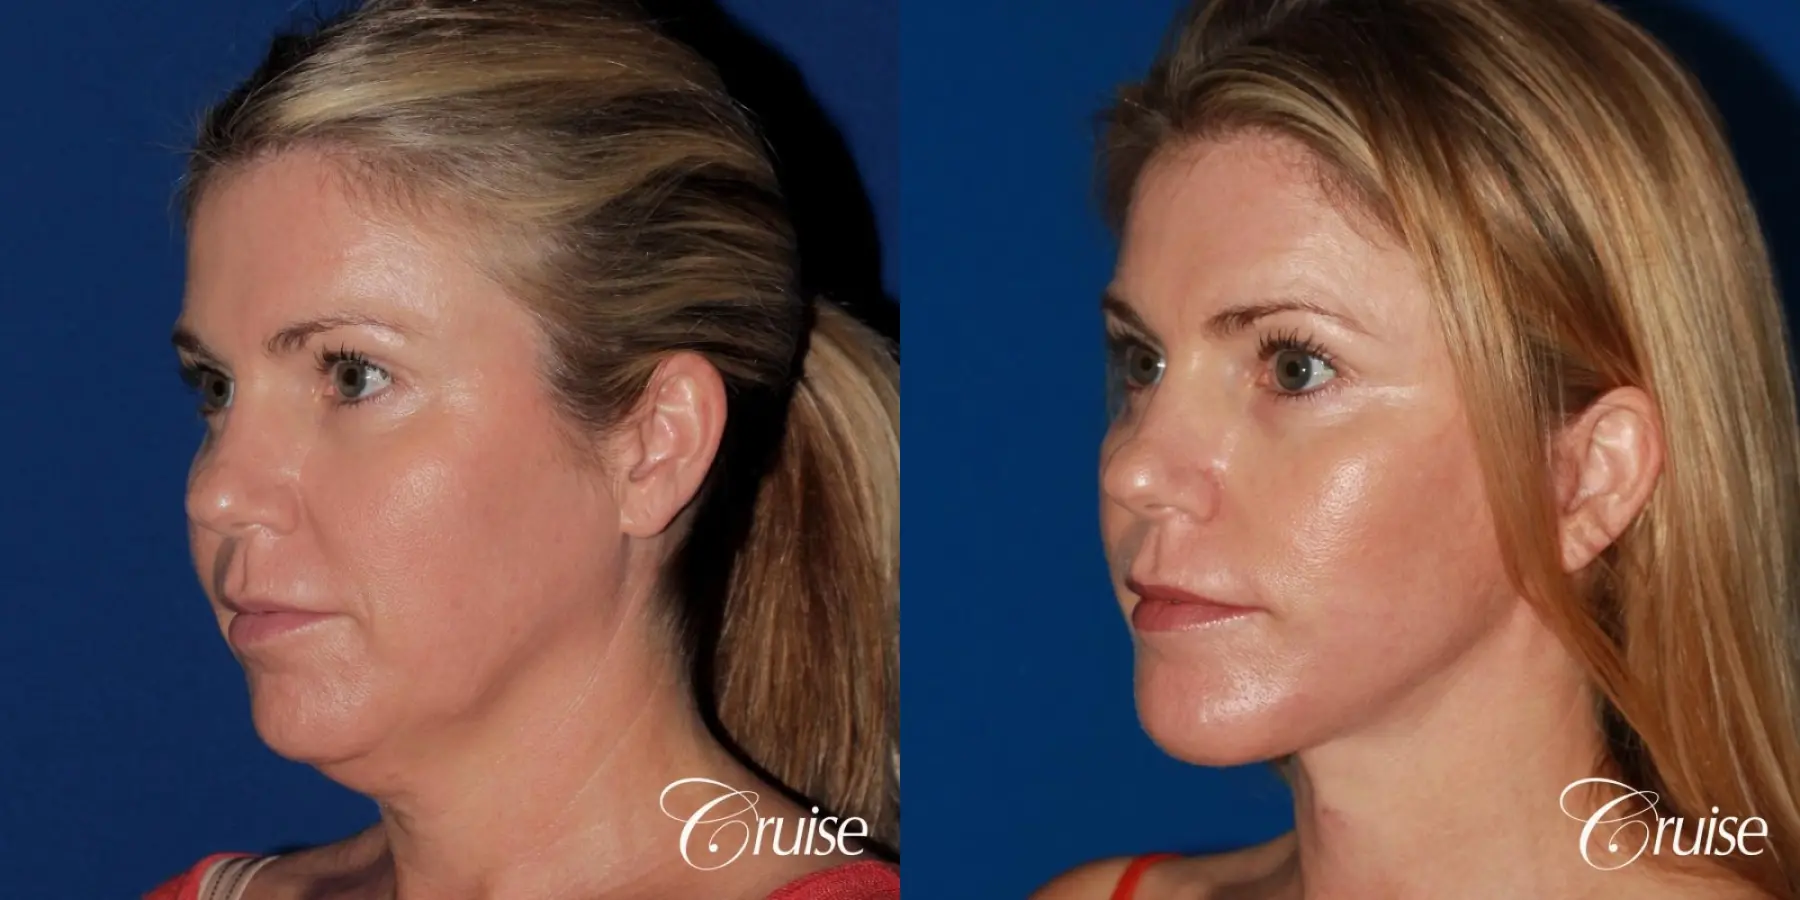 lower facelift with chin liposuction - Before and After 3